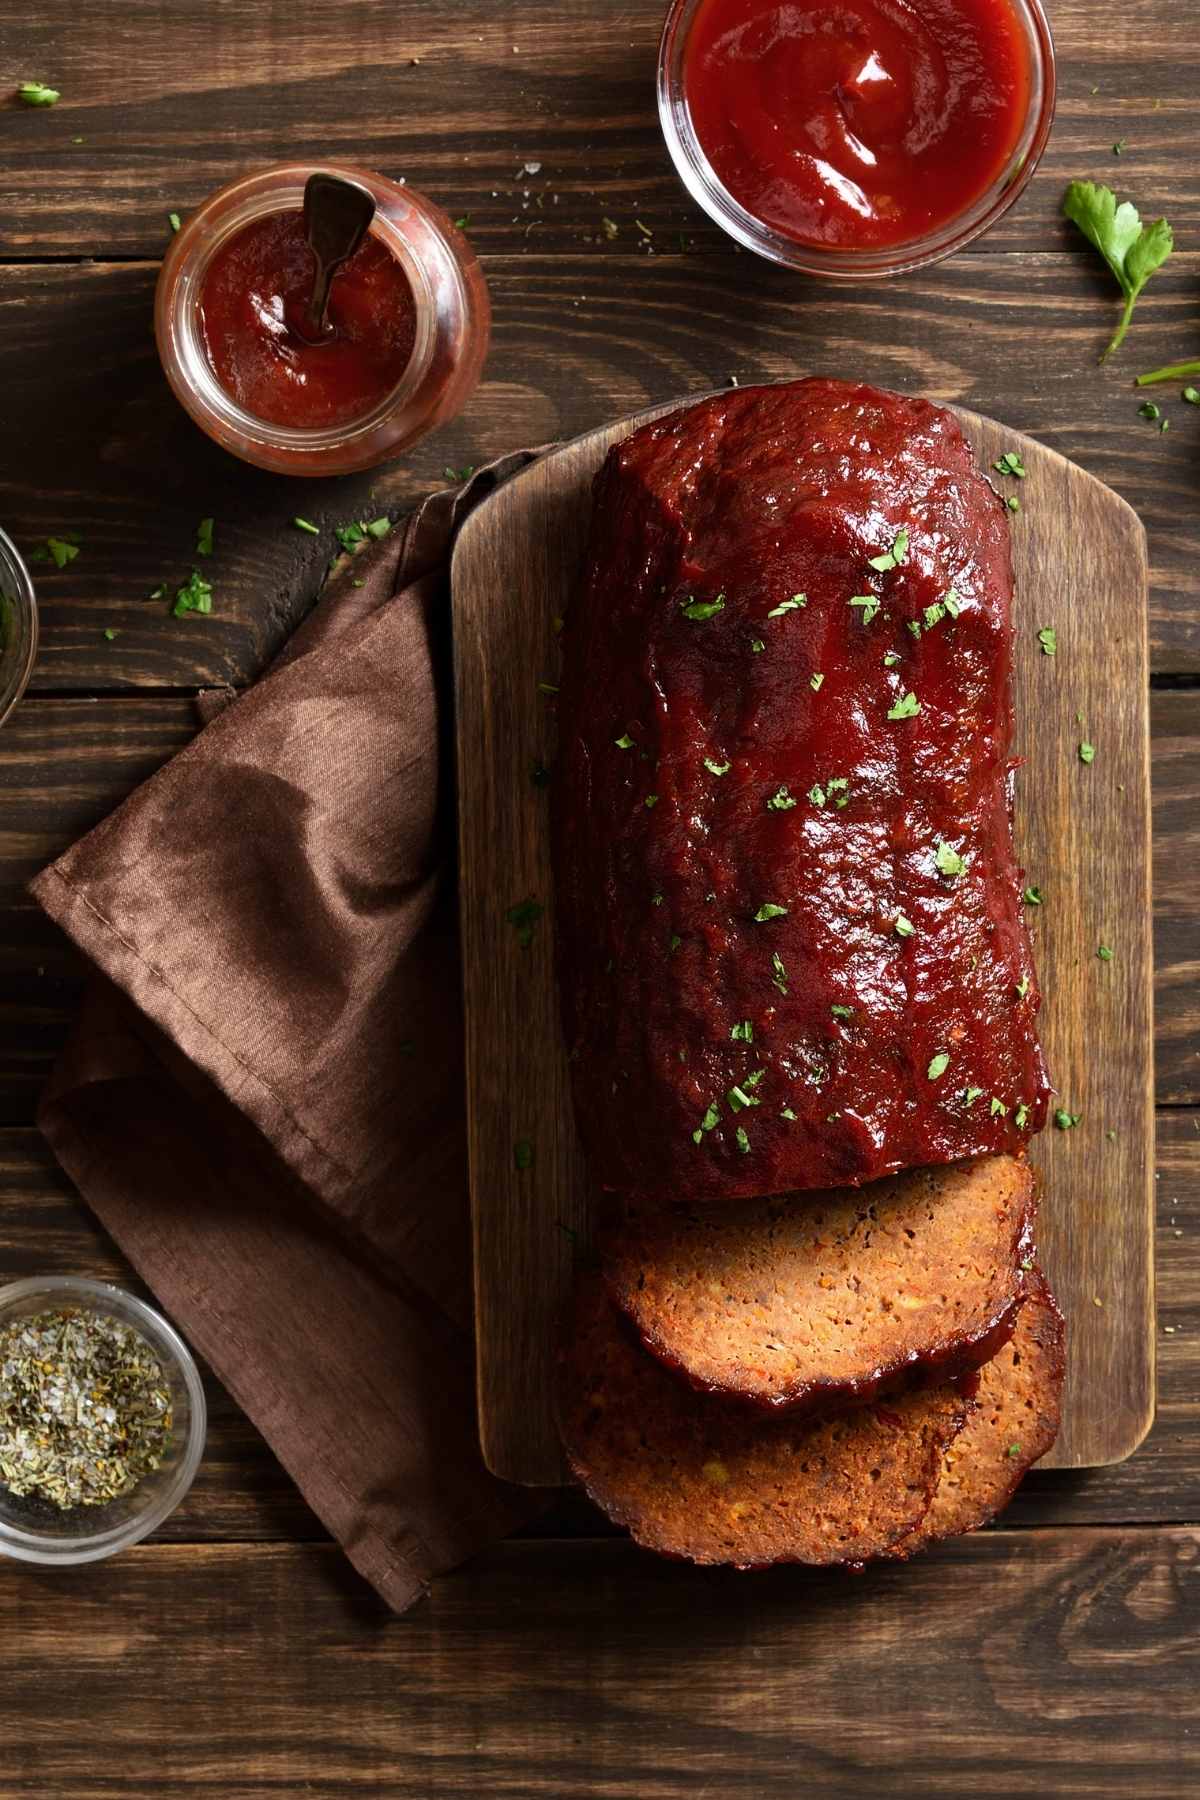 A weeknight meal of meatloaf is standard fare in many households. It’s easy to make, just about everyone loves it, and leftovers can be enjoyed on sandwiches! One of the most important aspects of making meatloaf is cooking it until it’s perfectly done. You don’t want it to be dry and you definitely don’t want it to be raw!